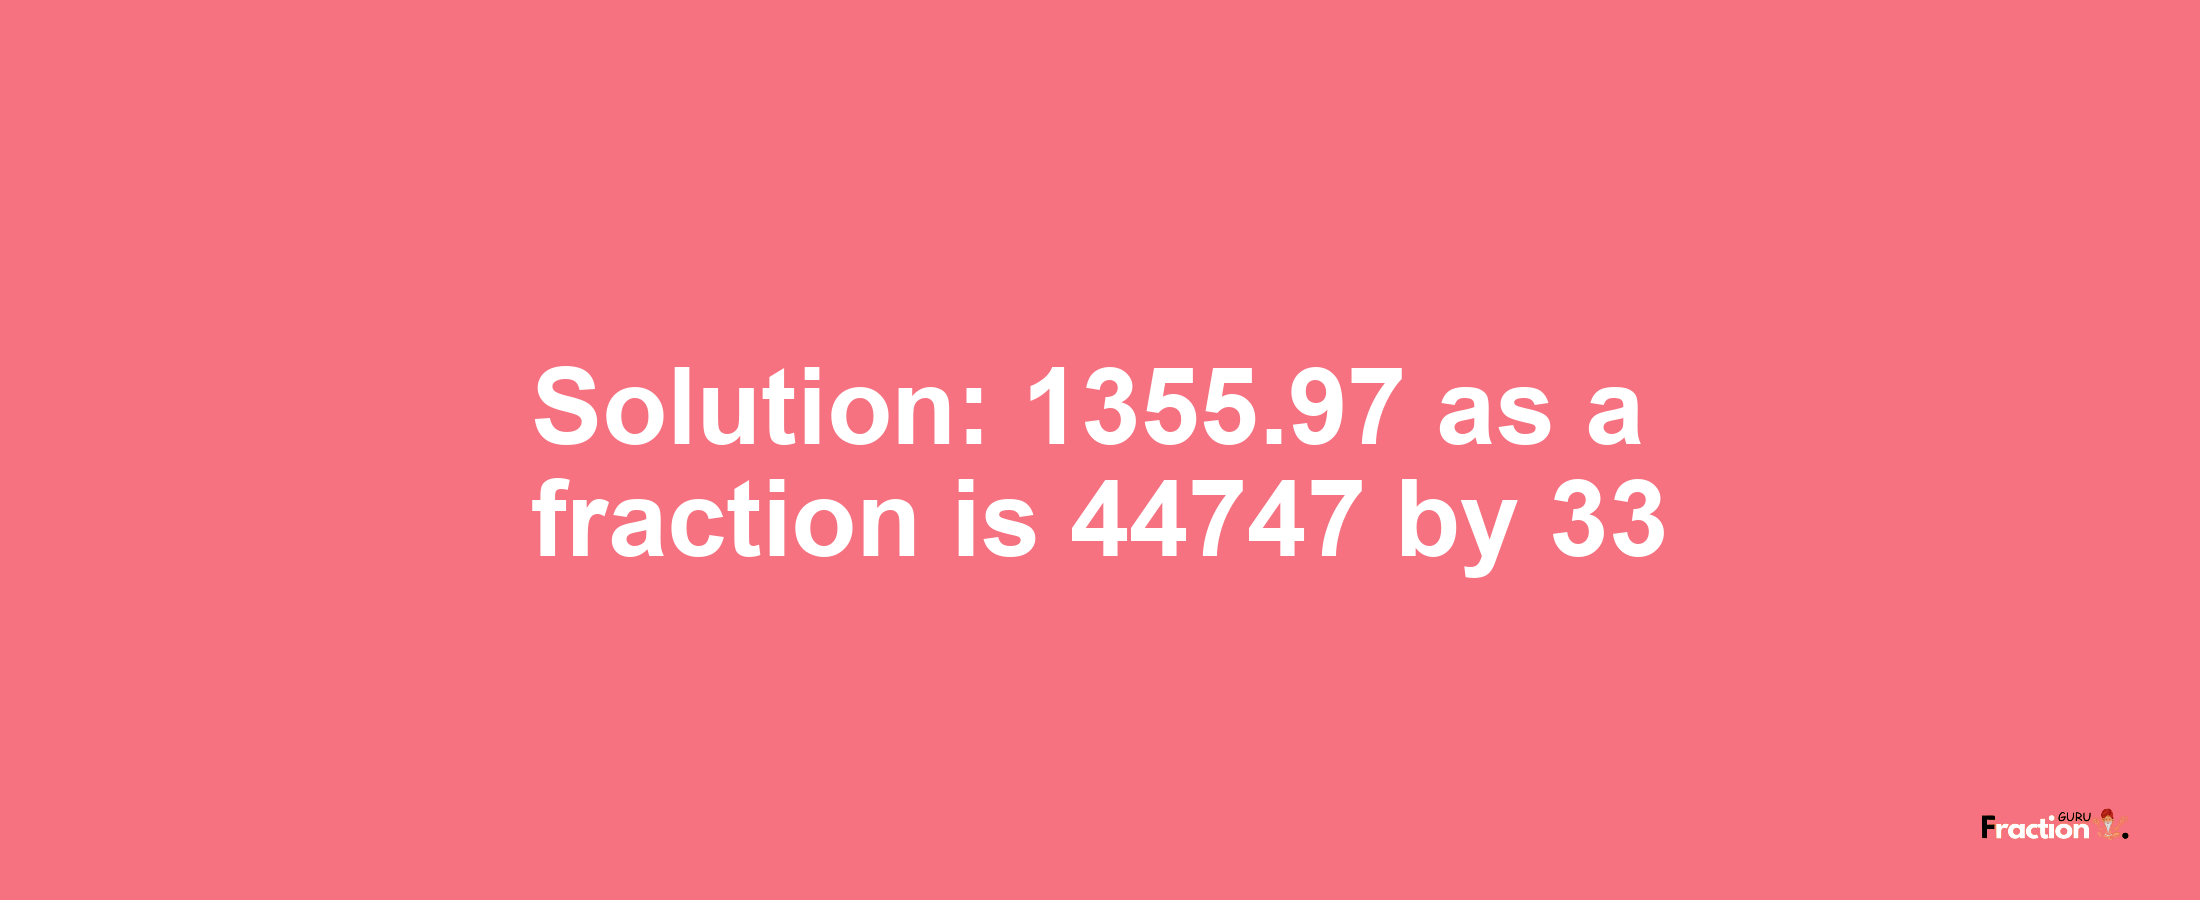 Solution:1355.97 as a fraction is 44747/33